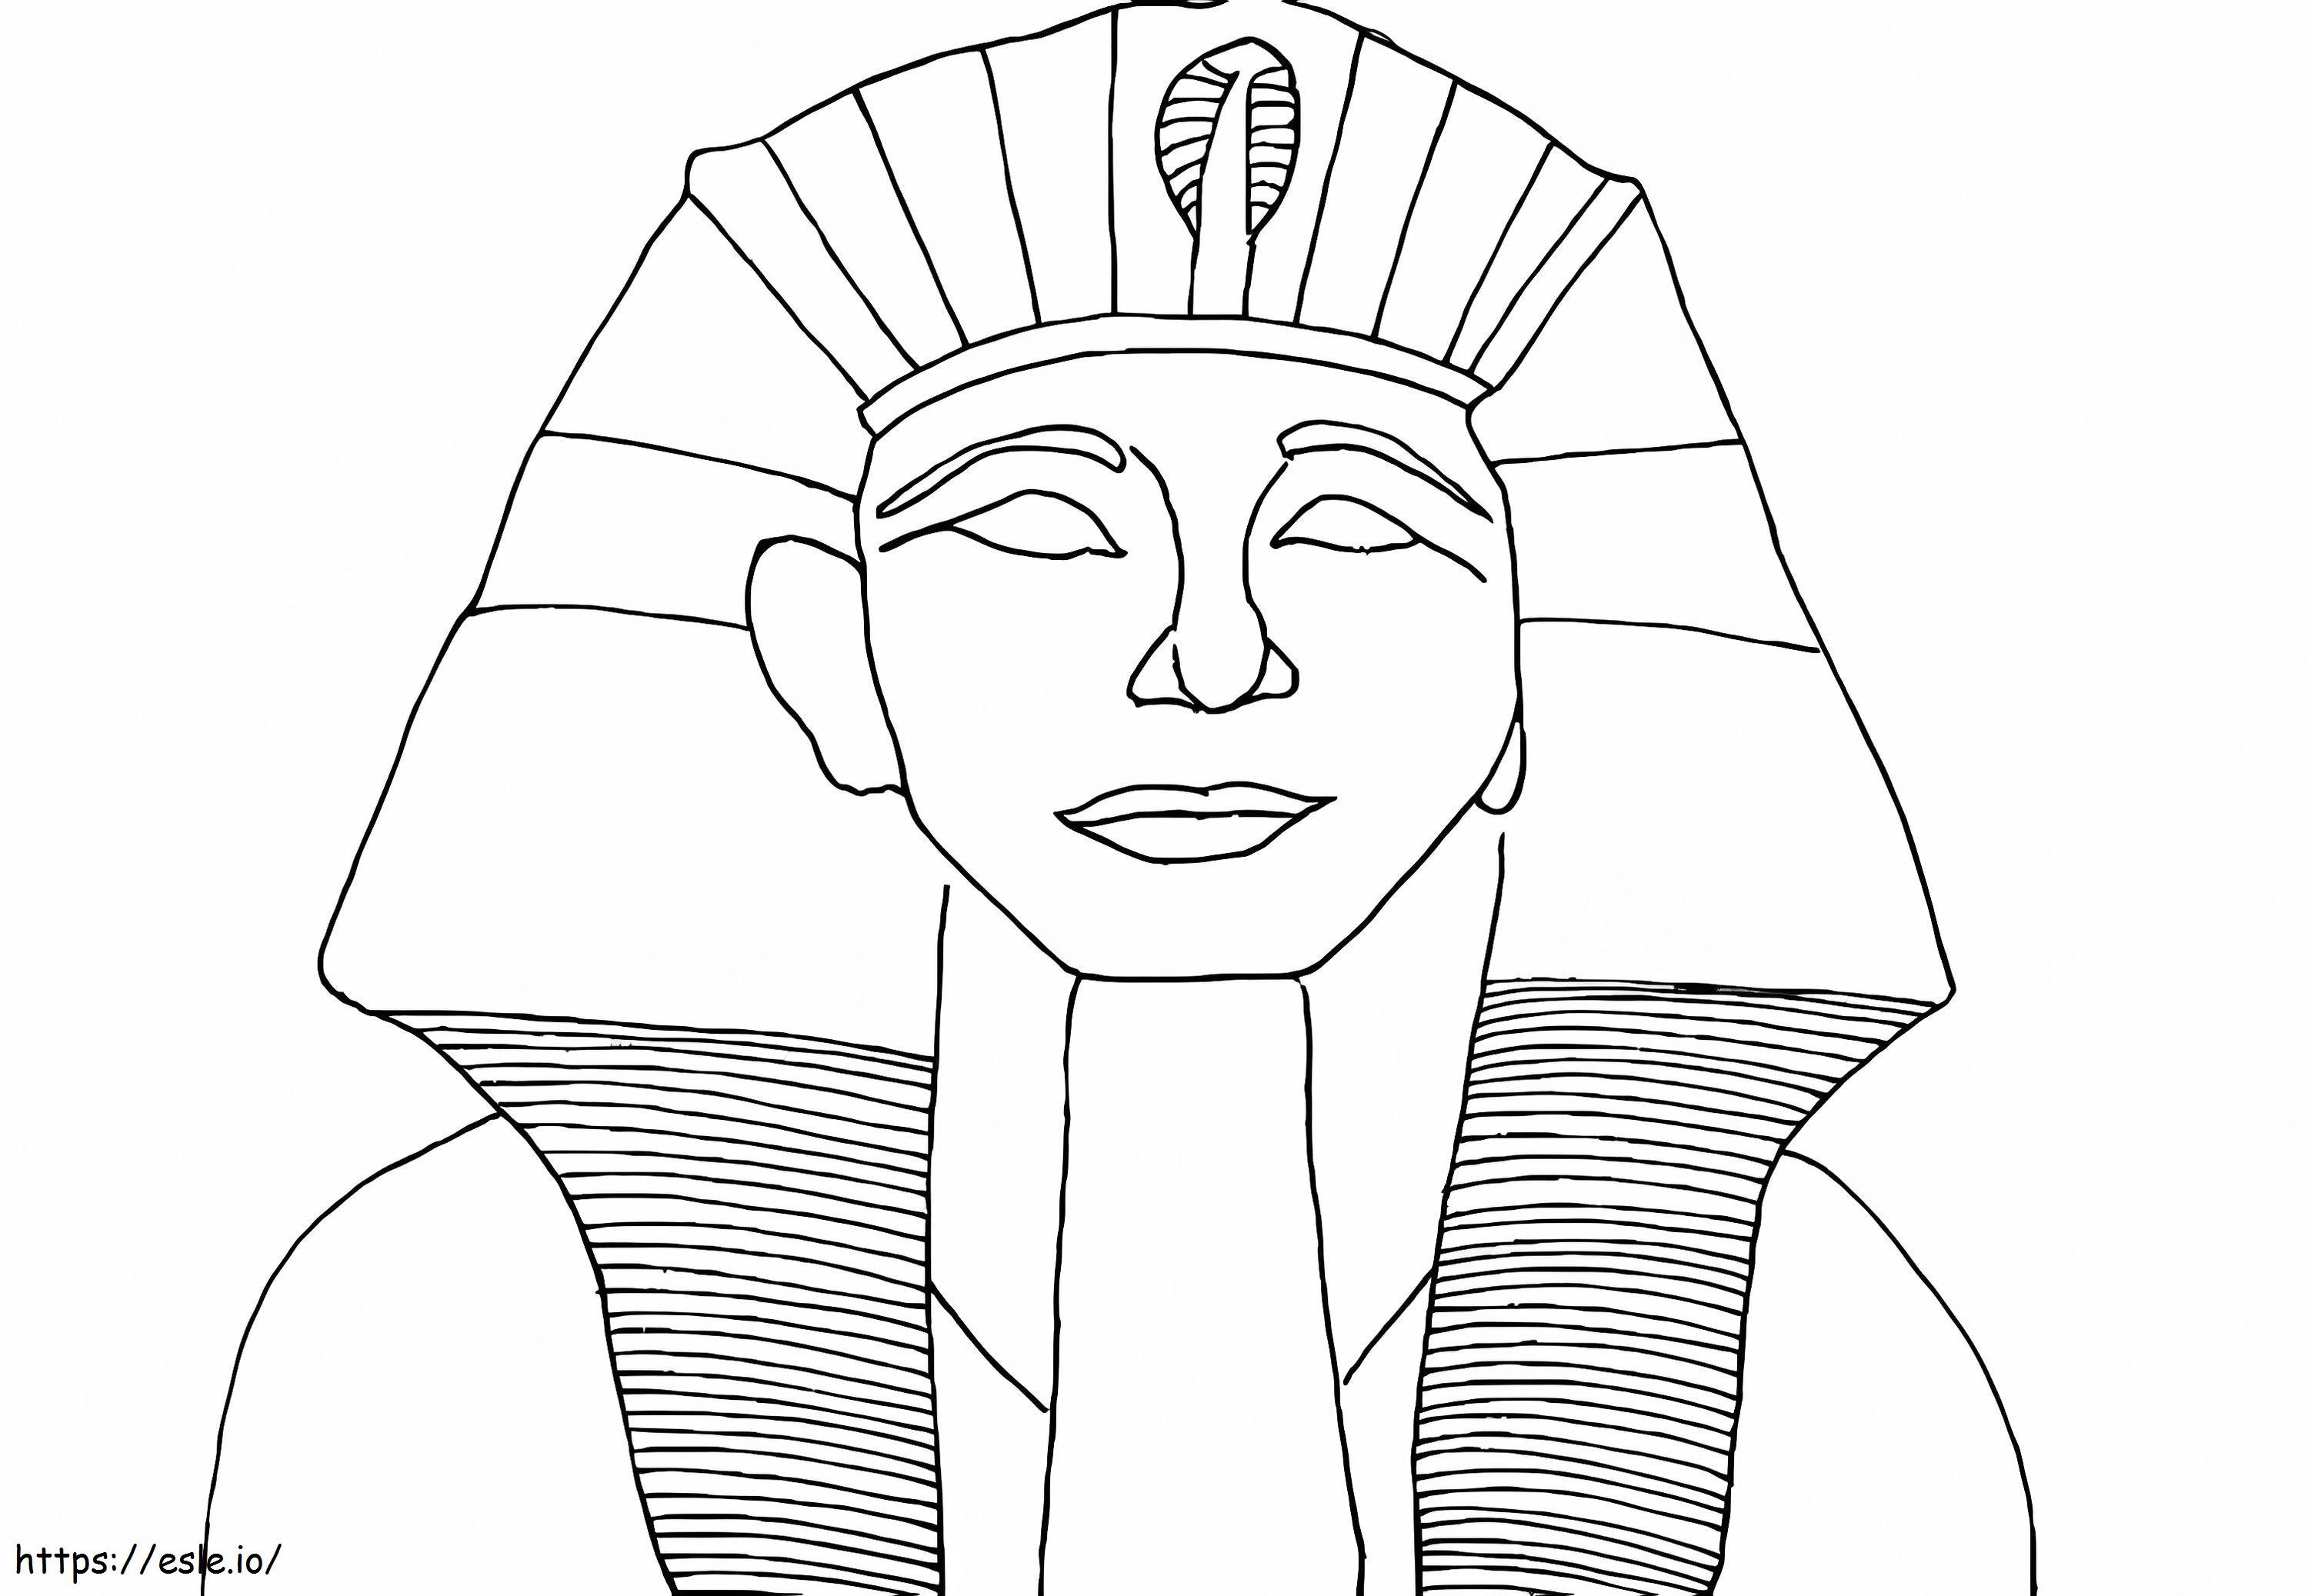 1493903742 Egyptian Pharaoh coloring page